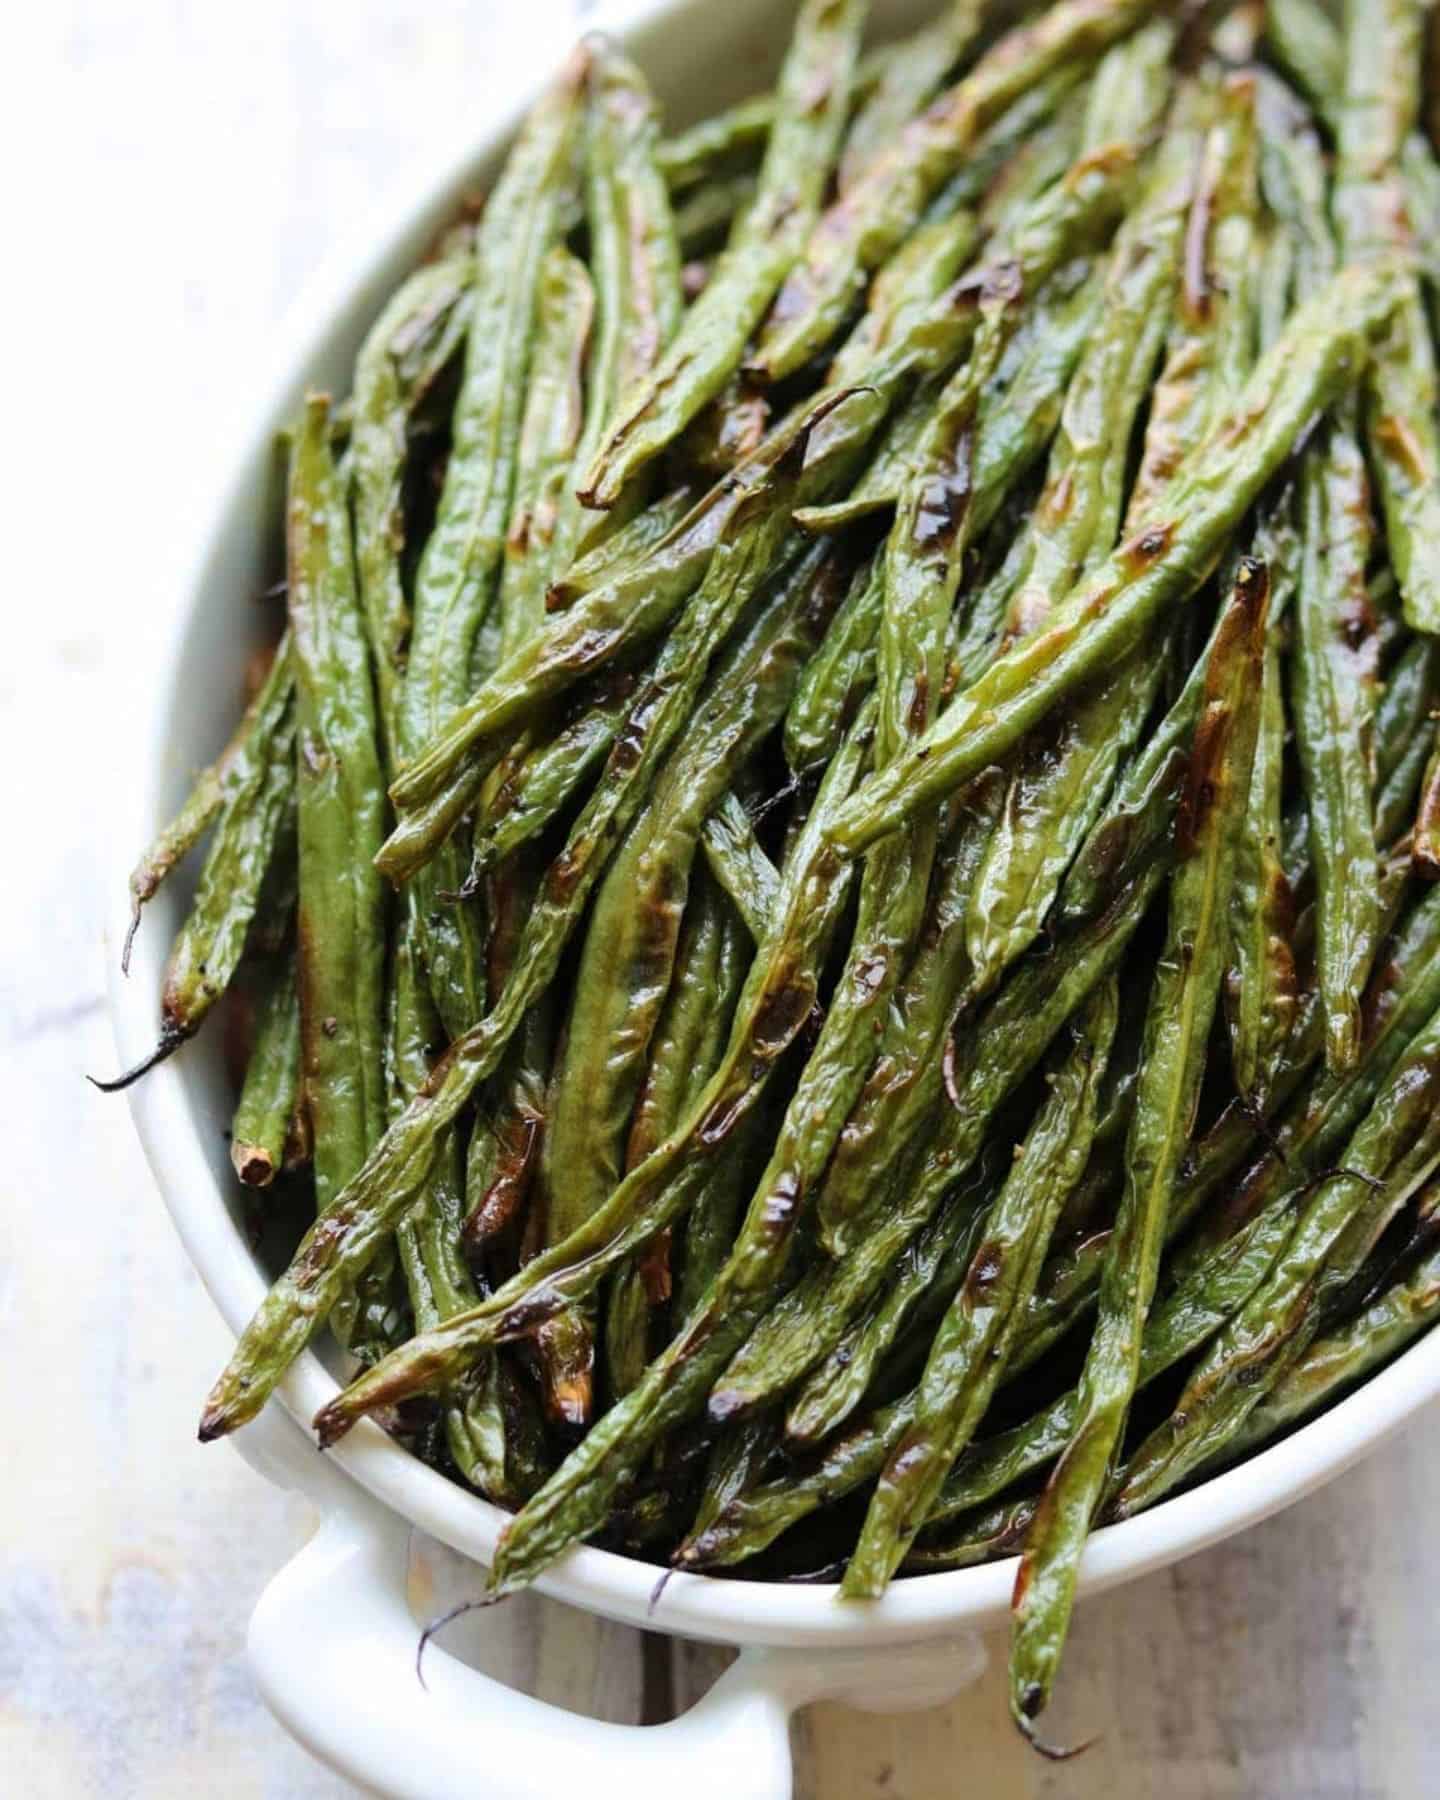 Blistered green beans in a white bowl